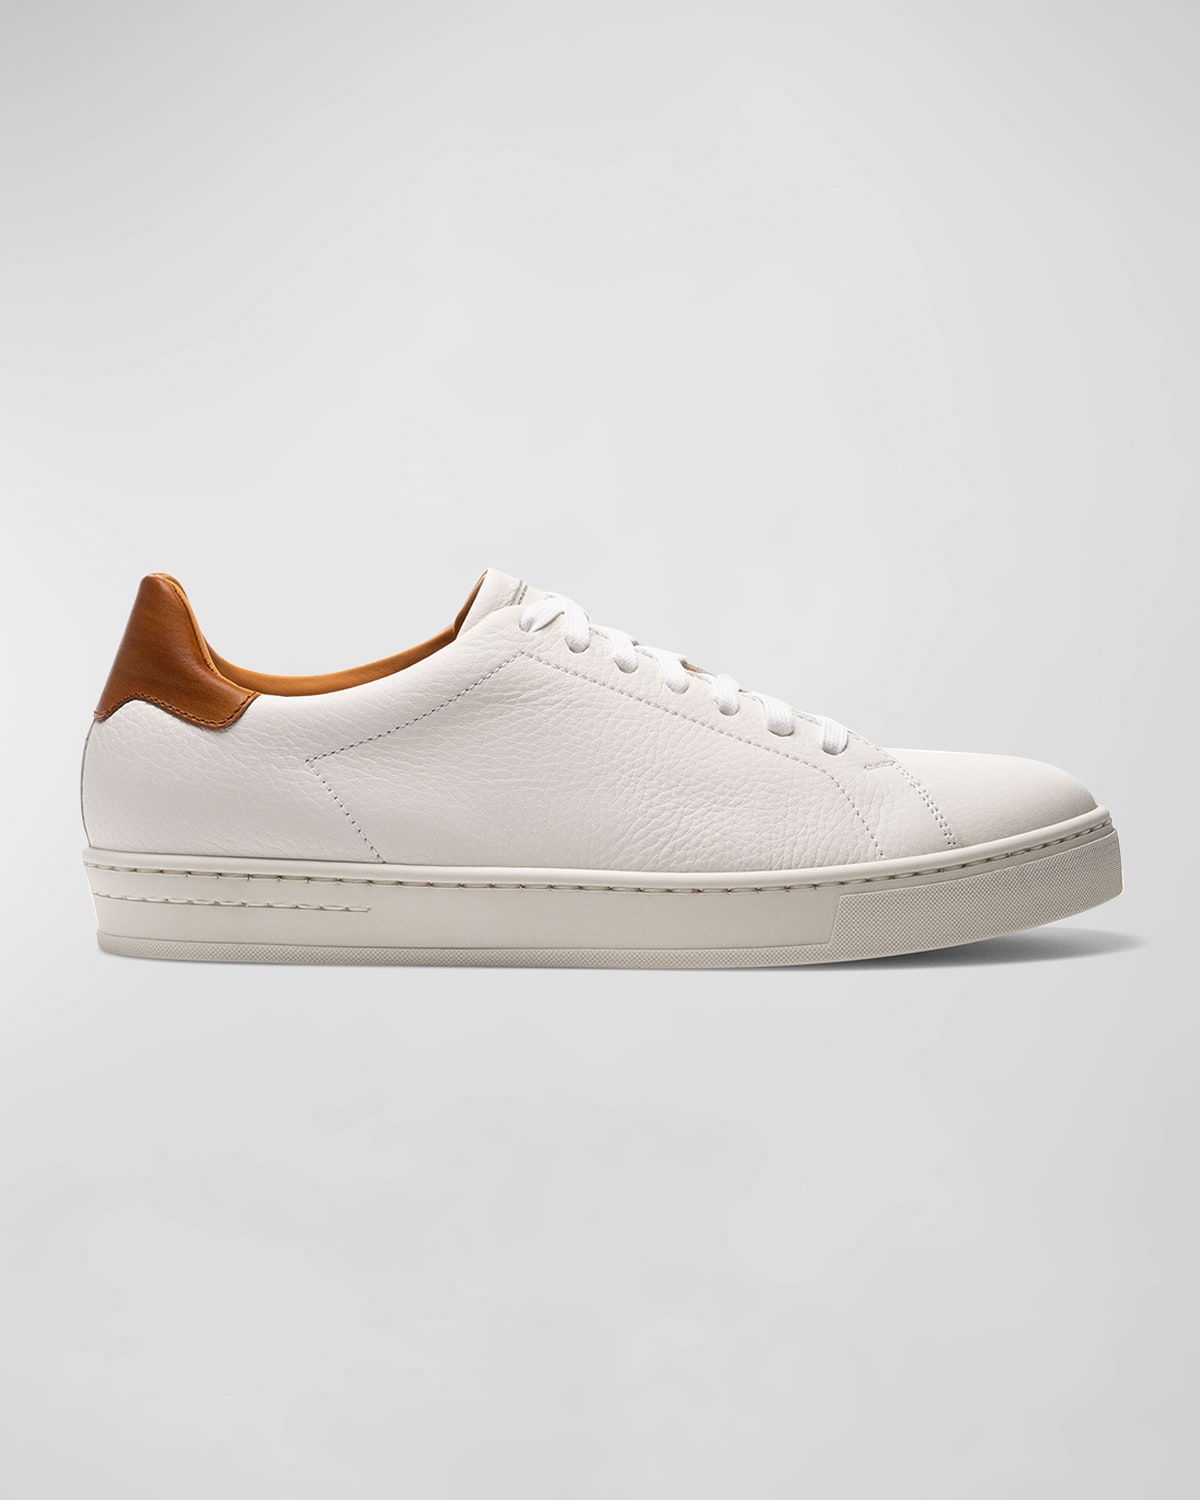 Magnanni Men's Arco Mix-Leather Trainer Sneakers | Neiman Marcus